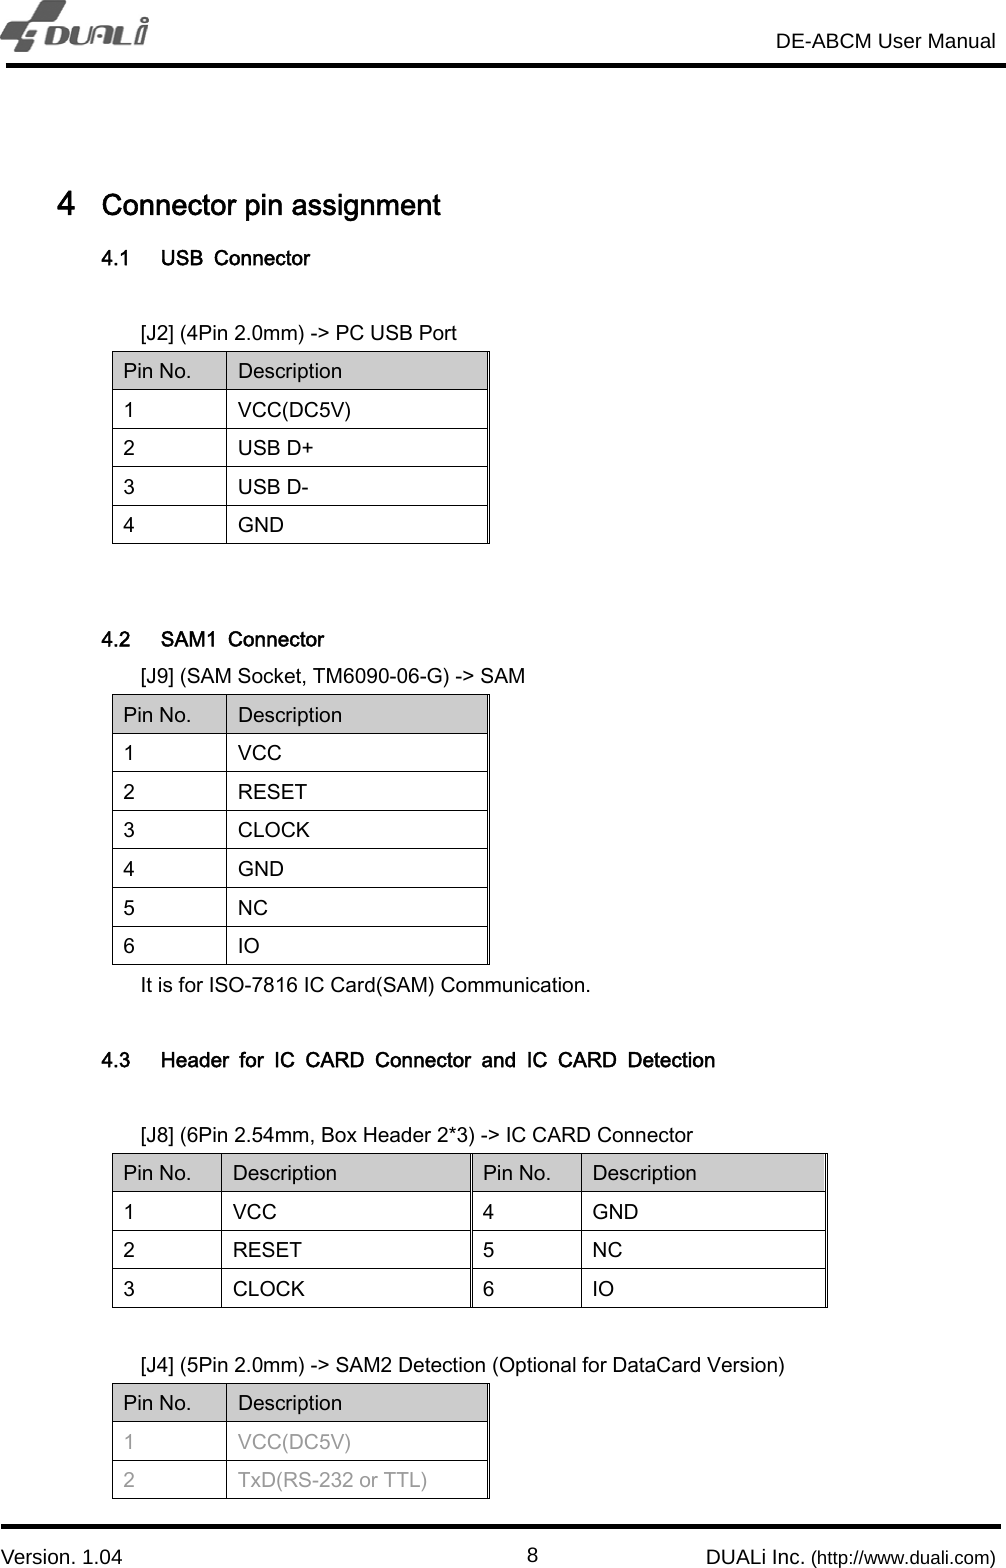                                                                       DE-ABCM User Manual                            Version. 1.04                                                        DUALi Inc. (http://www.duali.com)  8 4 Connector pin assignment 4.1 USB  Connector  [J2] (4Pin 2.0mm) -&gt; PC USB Port Pin No.  Description 1  VCC(DC5V) 2  USB D+ 3  USB D- 4  GND   4.2 SAM1  Connector     [J9] (SAM Socket, TM6090-06-G) -&gt; SAM Pin No.  Description 1  VCC 2  RESET 3  CLOCK 4  GND 5  NC 6  IO   It is for ISO-7816 IC Card(SAM) Communication.   4.3 Header  for  IC  CARD  Connector  and  IC  CARD  Detection    [J8] (6Pin 2.54mm, Box Header 2*3) -&gt; IC CARD Connector Pin No.  Description  Pin No.  Description 1  VCC  4  GND 2  RESET  5  NC 3  CLOCK  6  IO  [J4] (5Pin 2.0mm) -&gt; SAM2 Detection (Optional for DataCard Version) Pin No.  Description 1  VCC(DC5V) 2  TxD(RS-232 or TTL) 